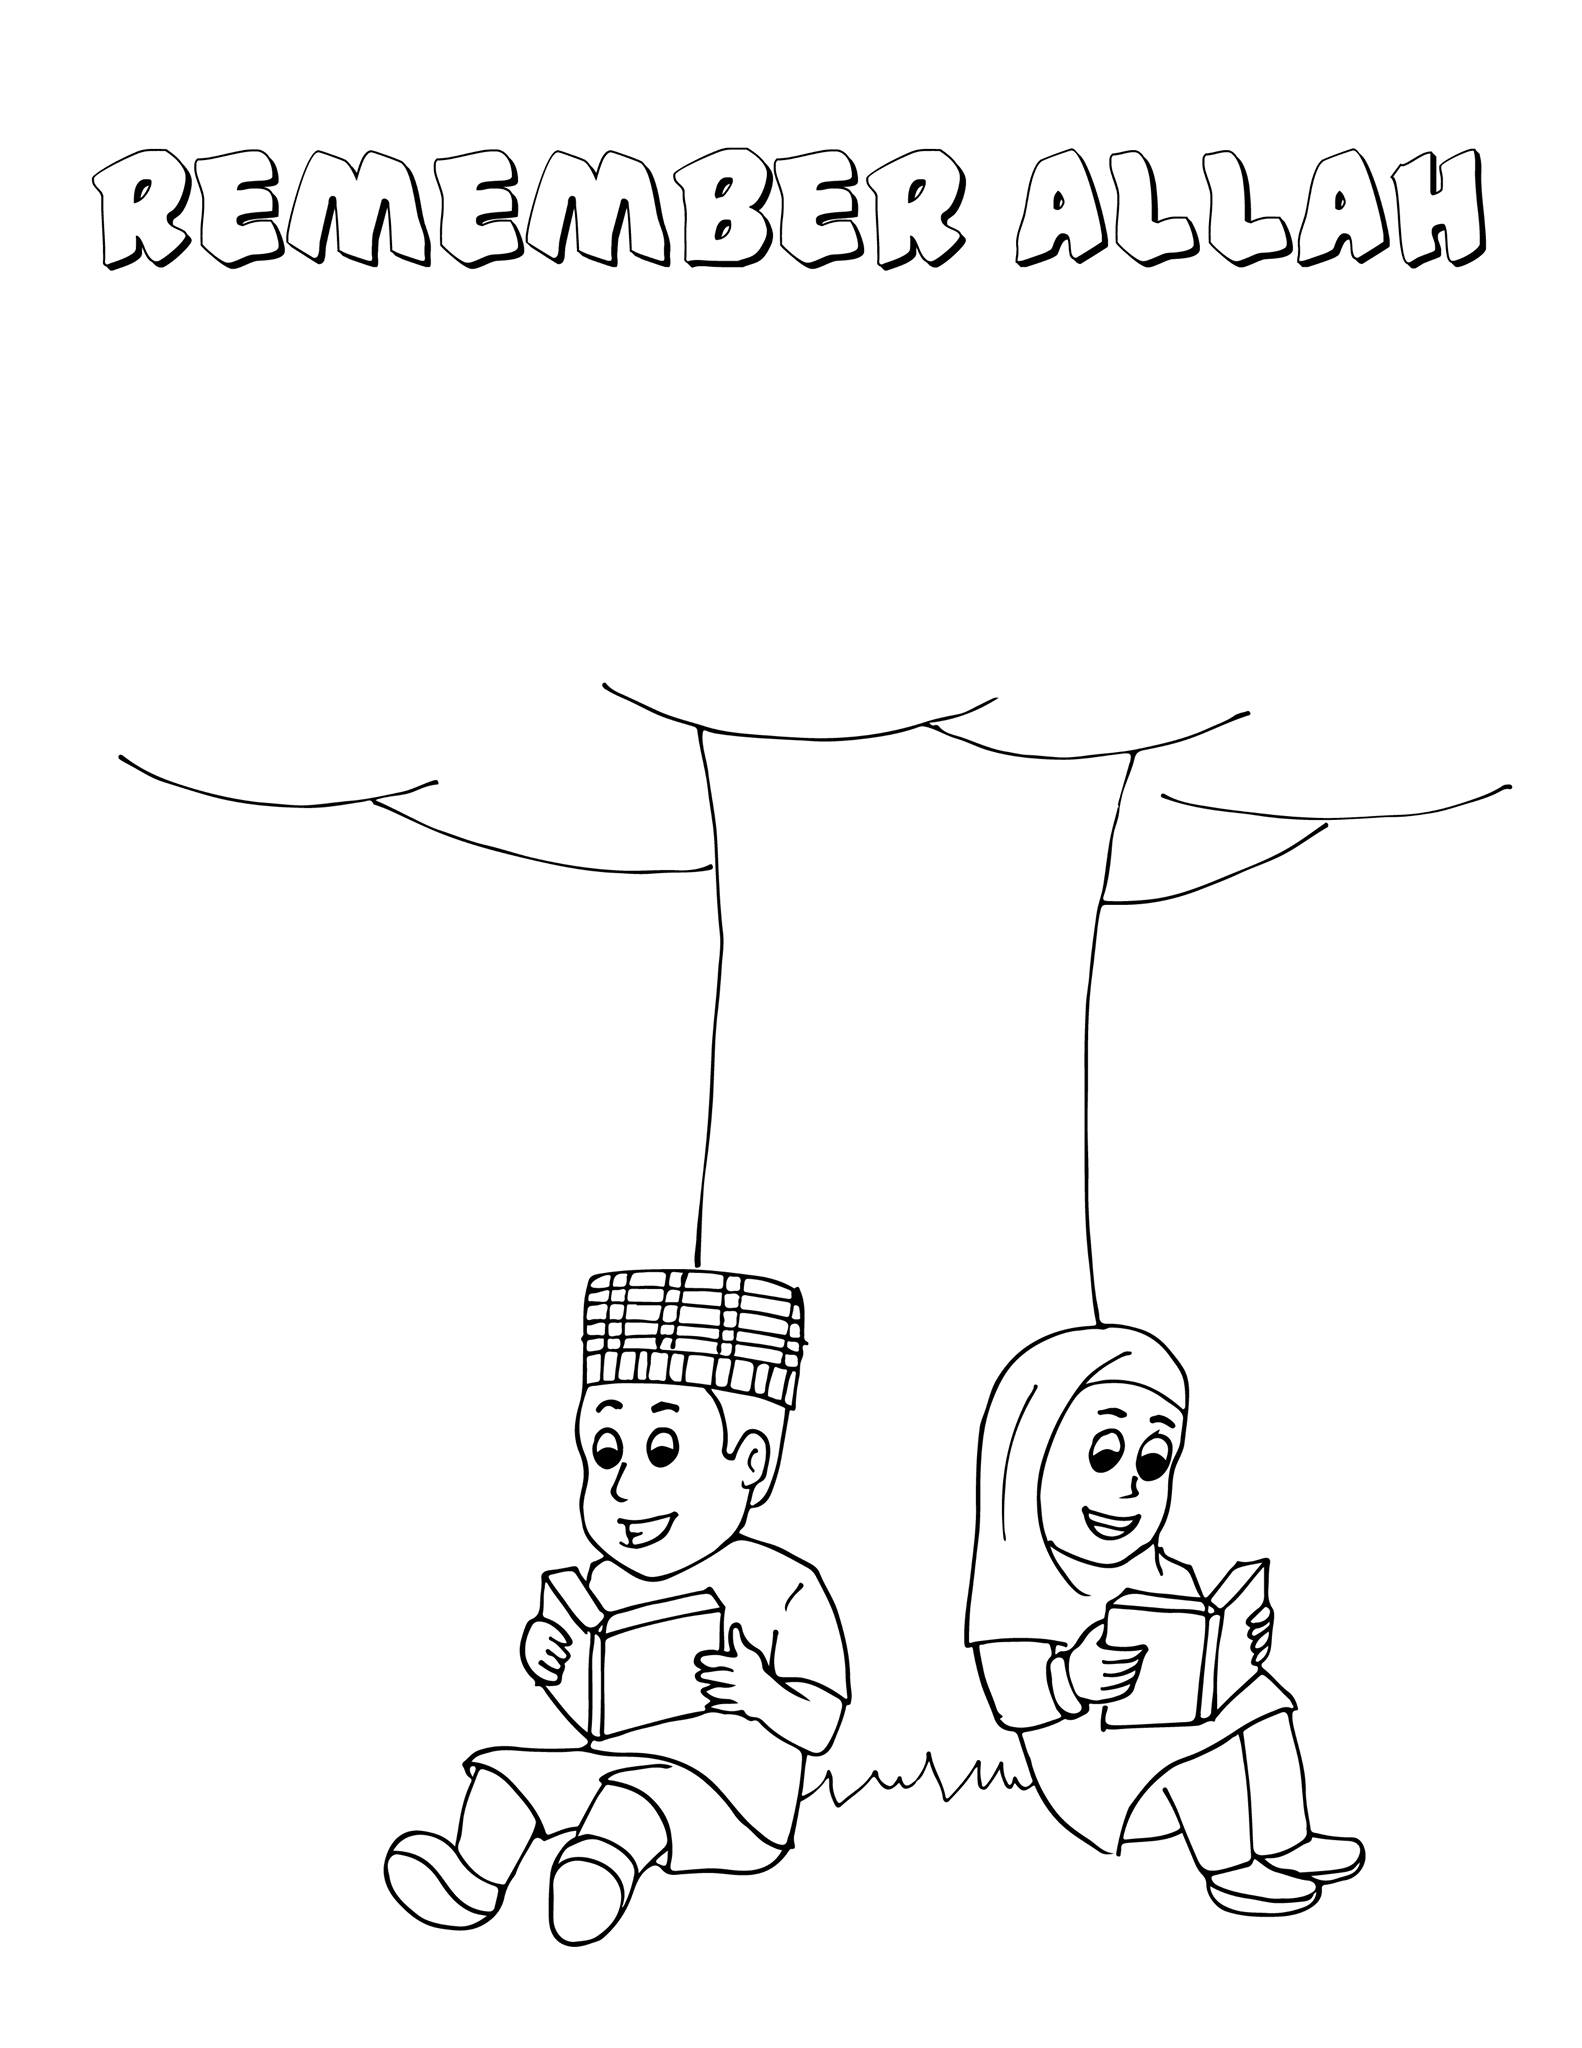 PJ Masks coloring pages - Free 24+ Quran Coloring Pages